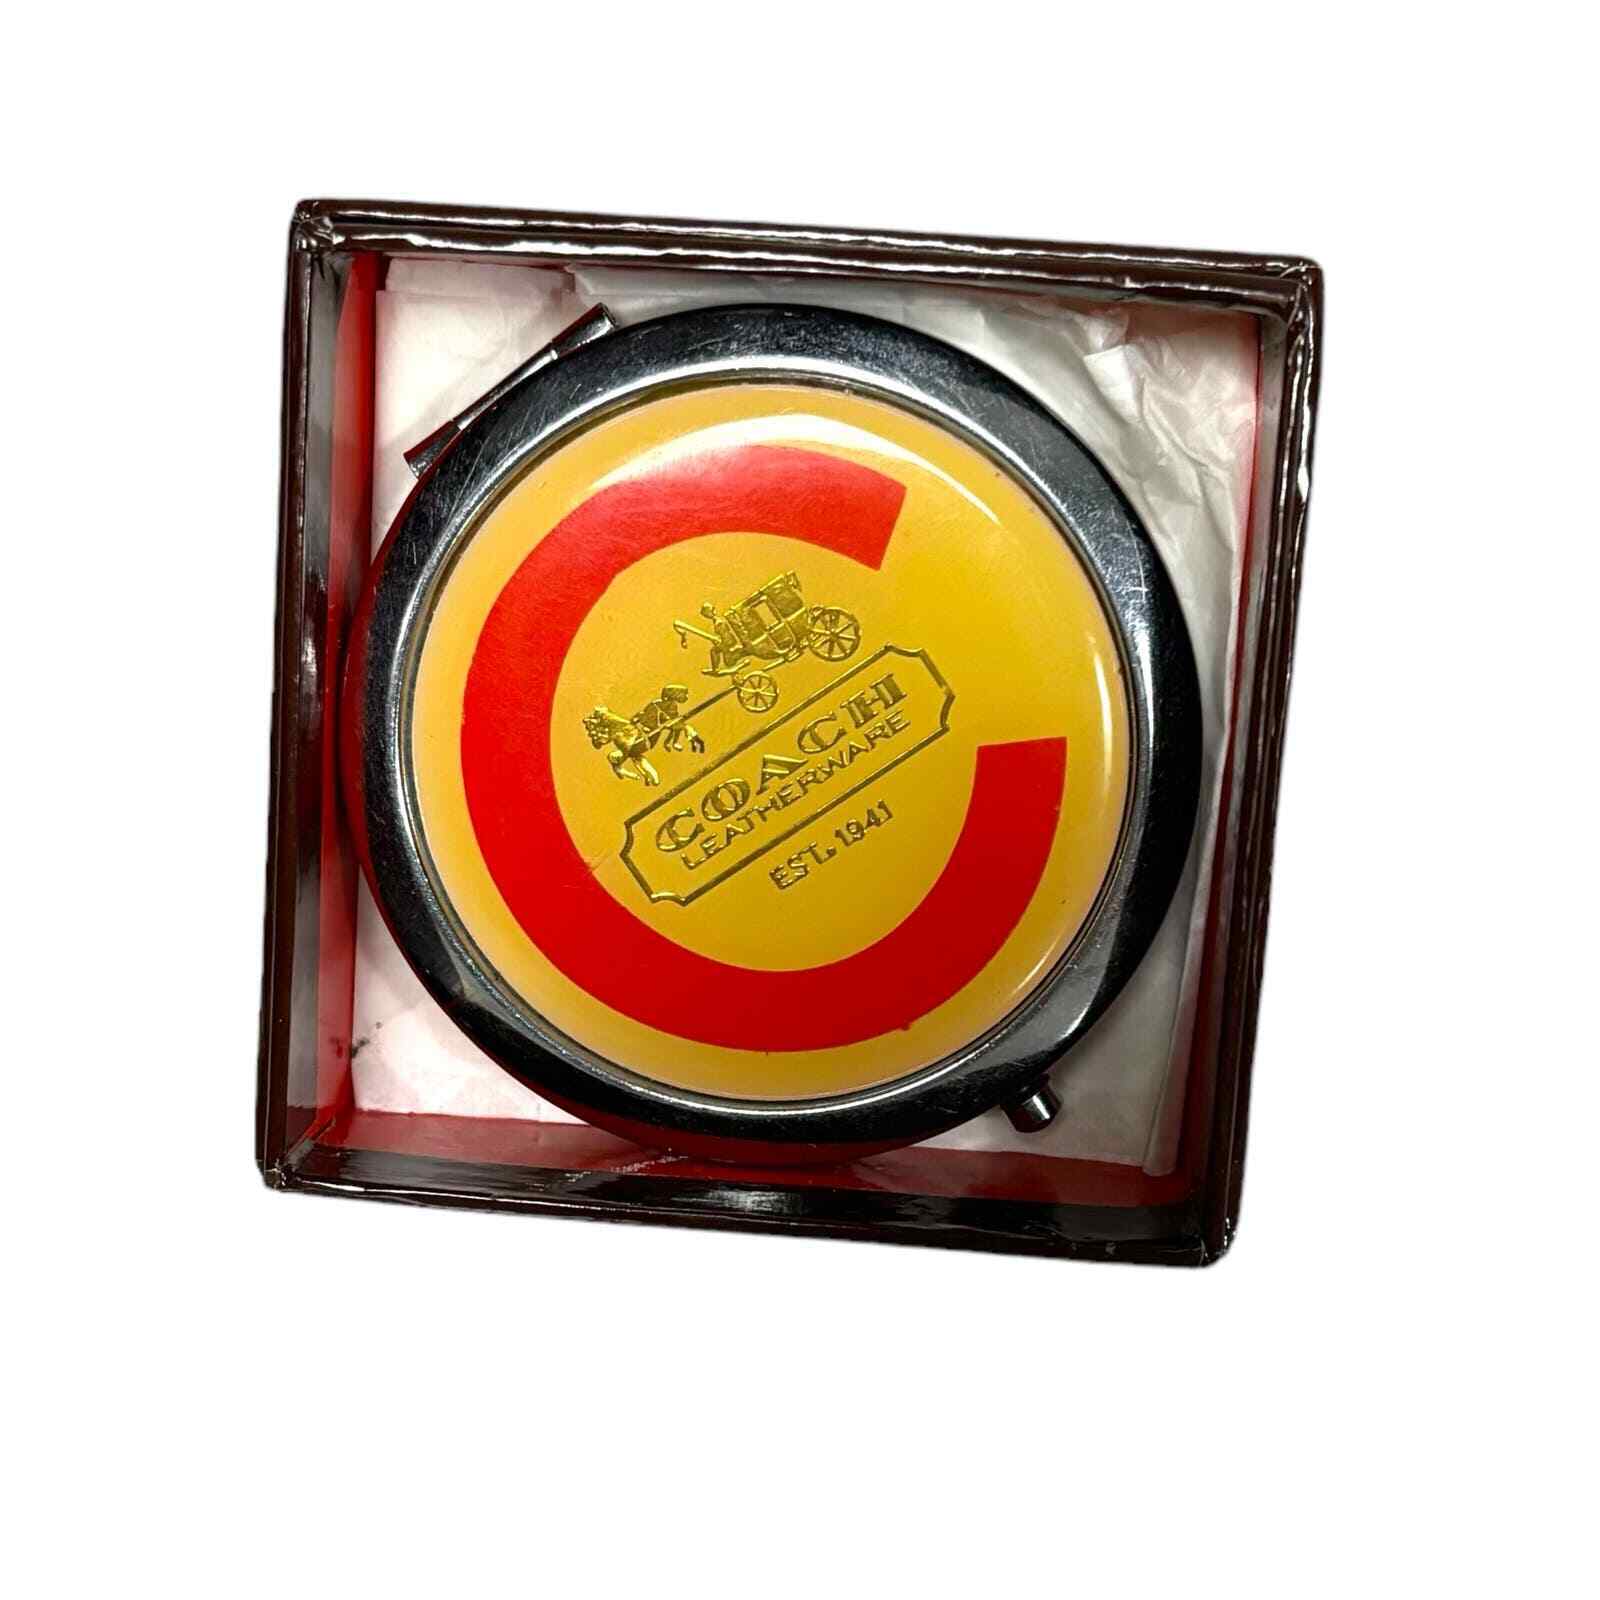 Coach Compact Mirror Double Sided Circle Metal Silver Yellow Logo Makeup 3”